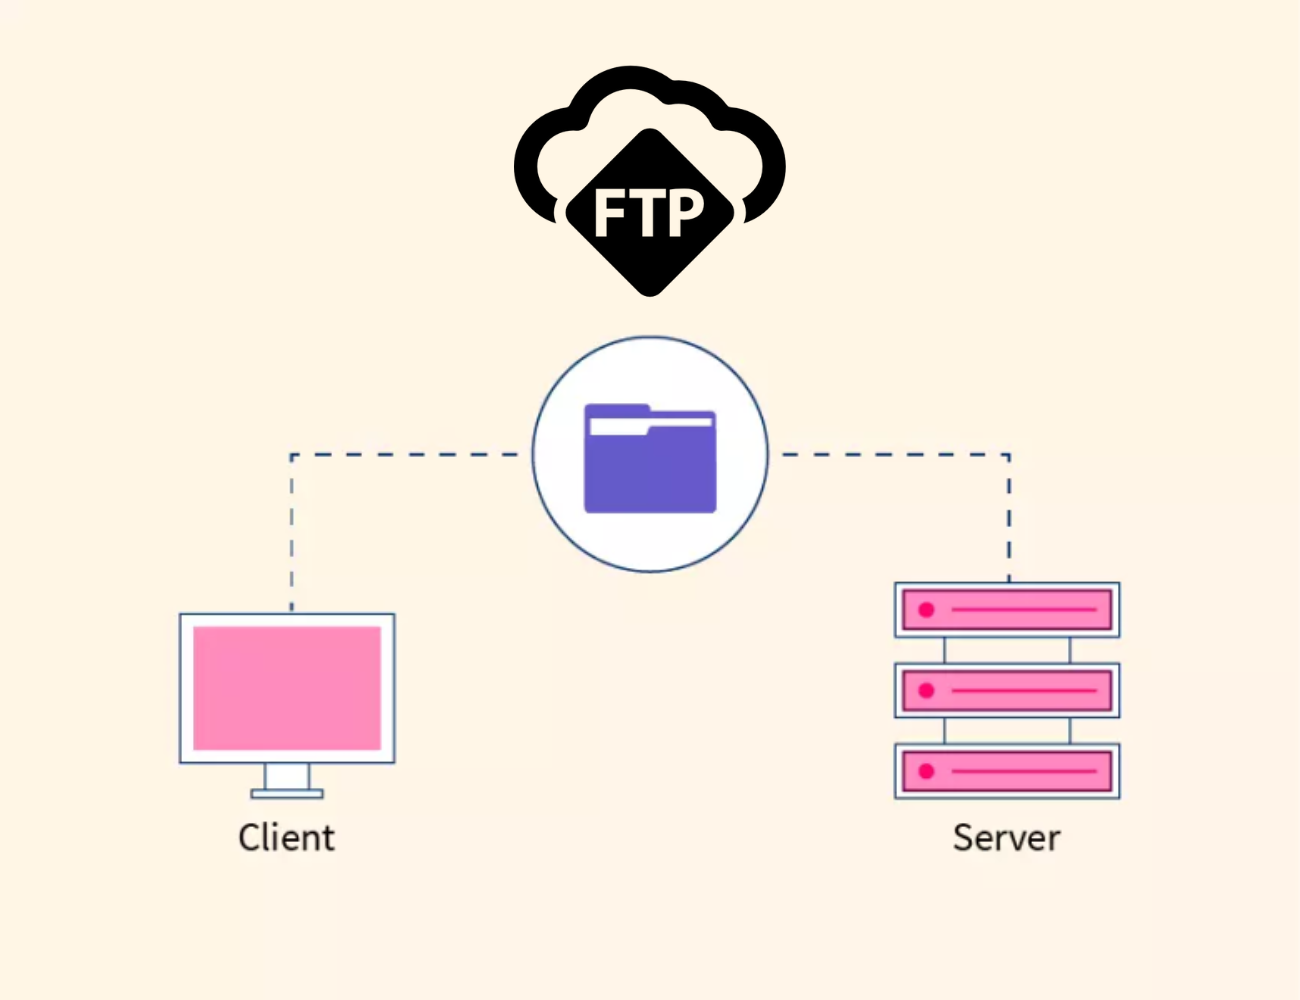 How File Transfer Protocol (FTP) In A Computer Network Works